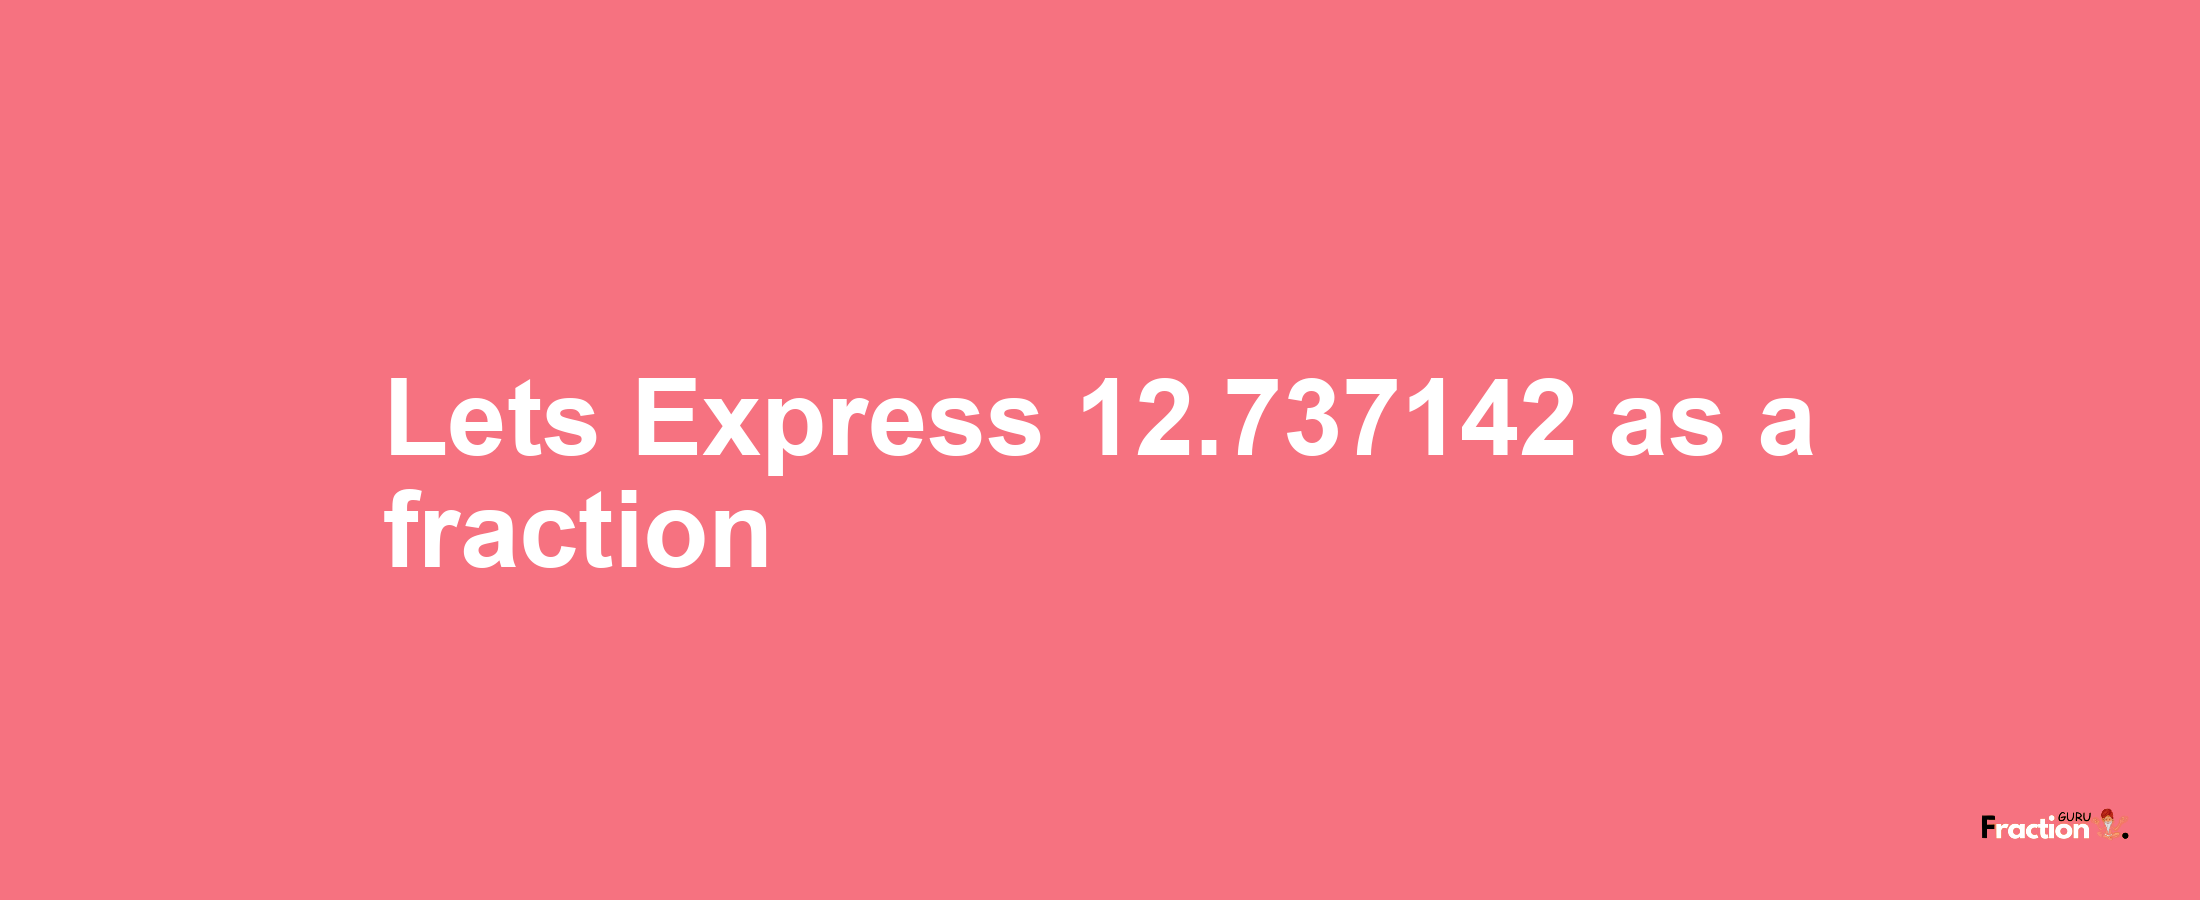 Lets Express 12.737142 as afraction